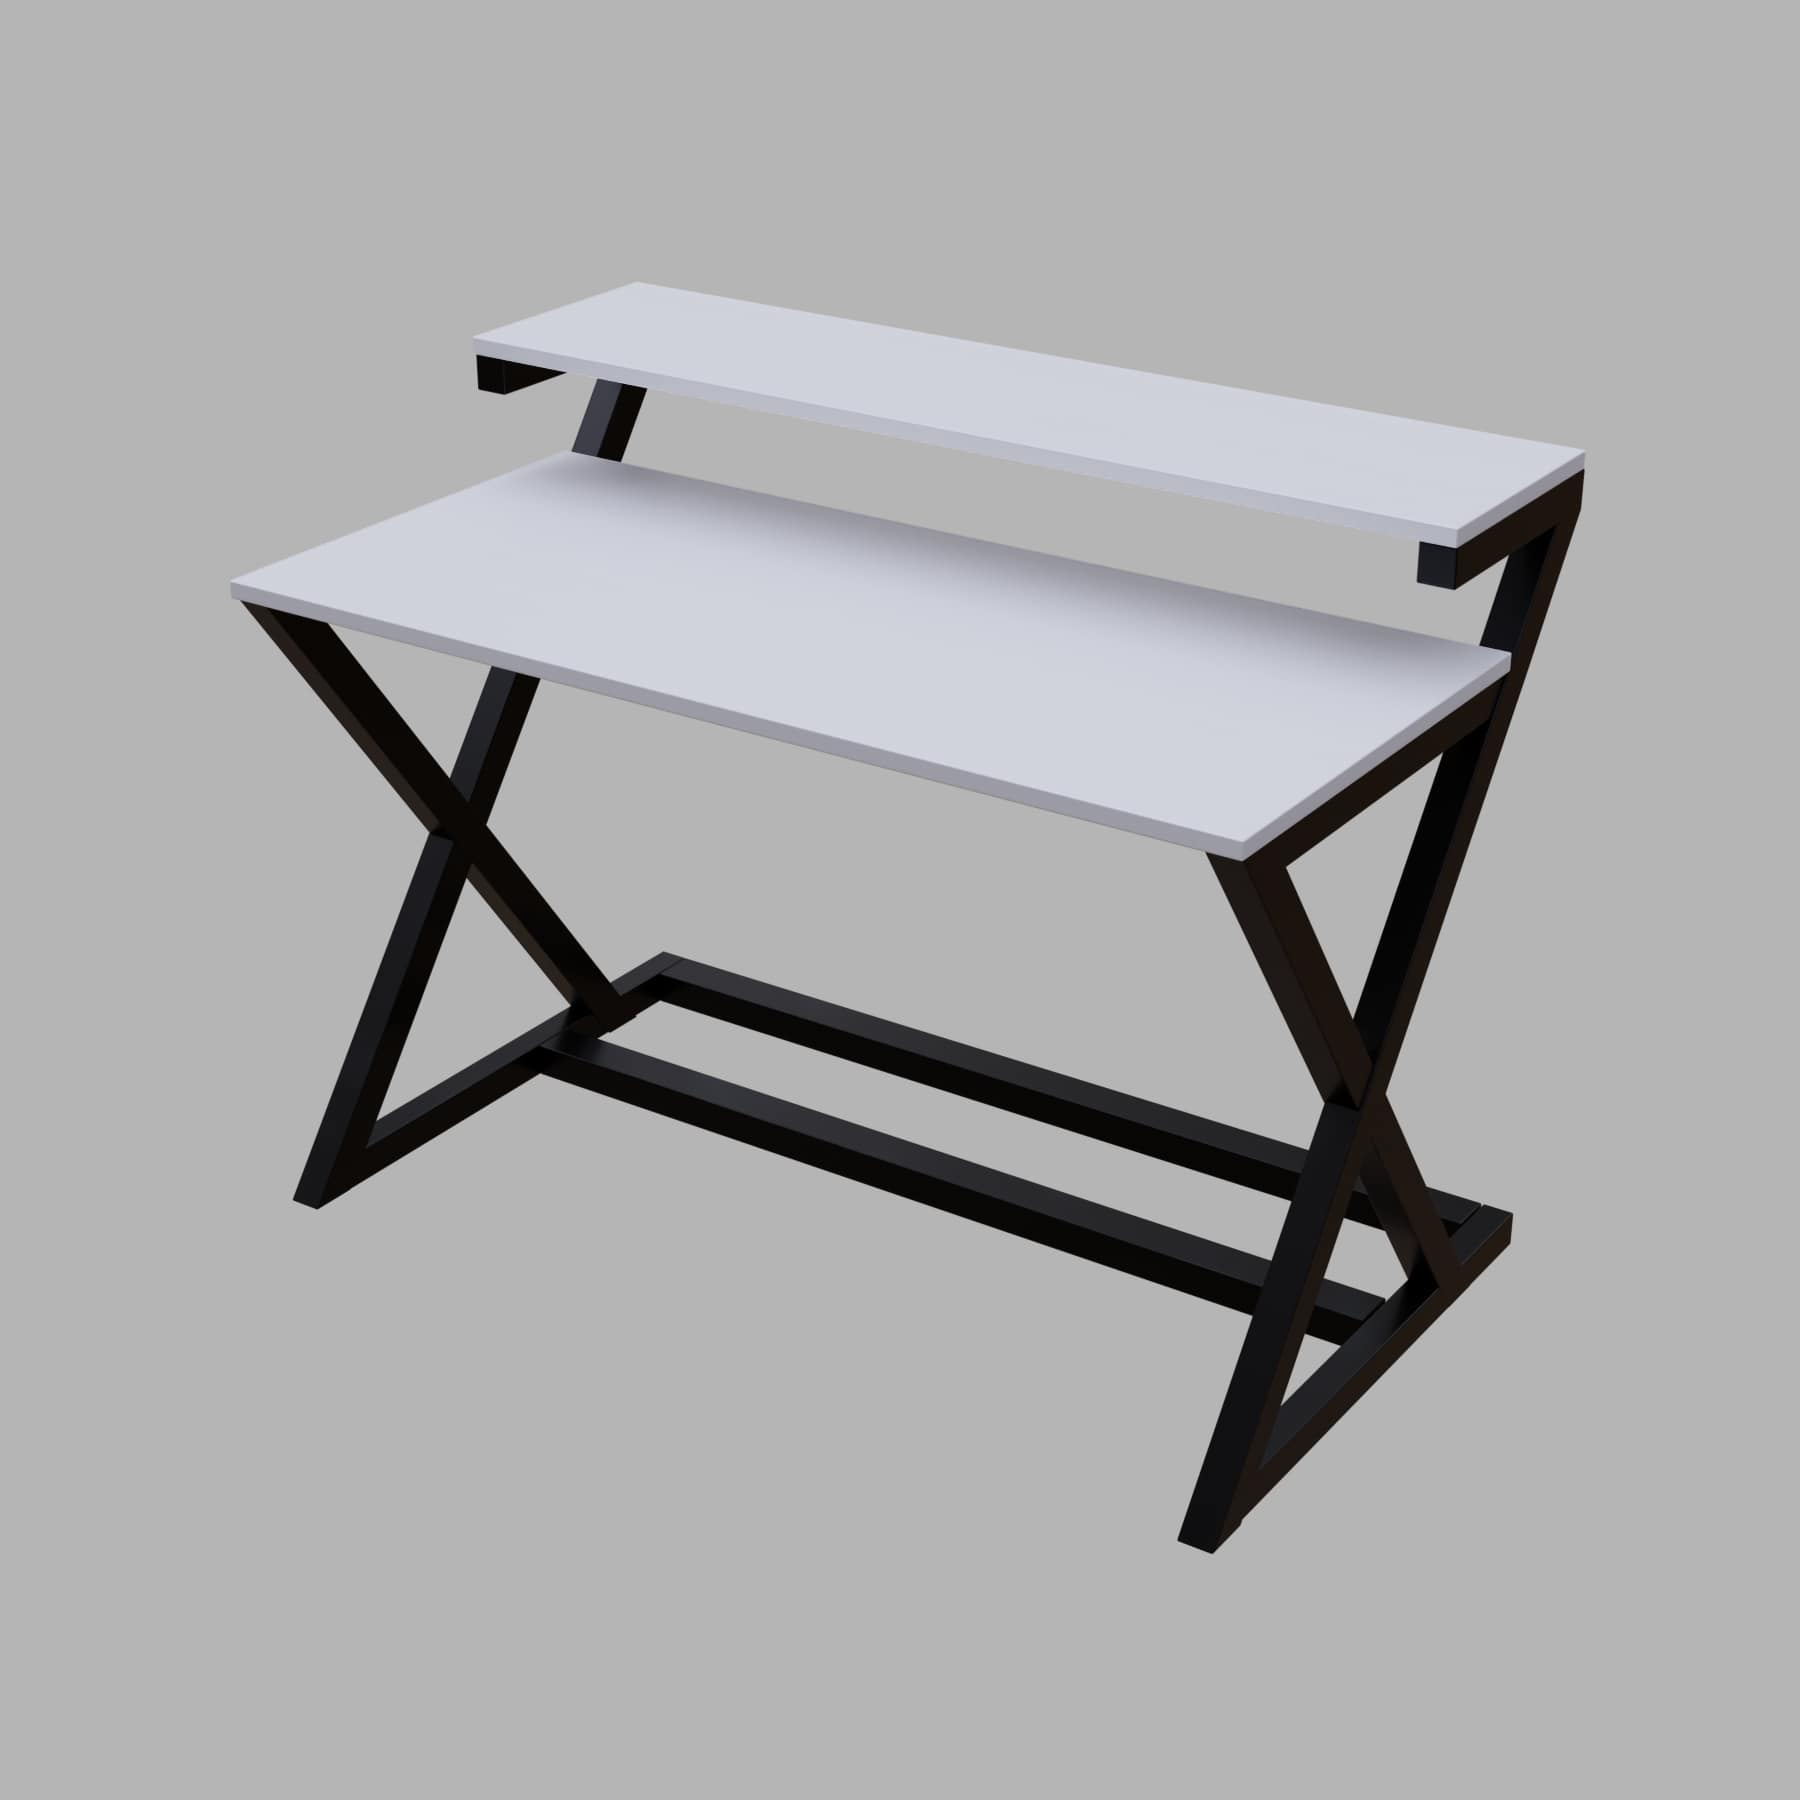 Austin Study Table in White Color with Upper Shelve